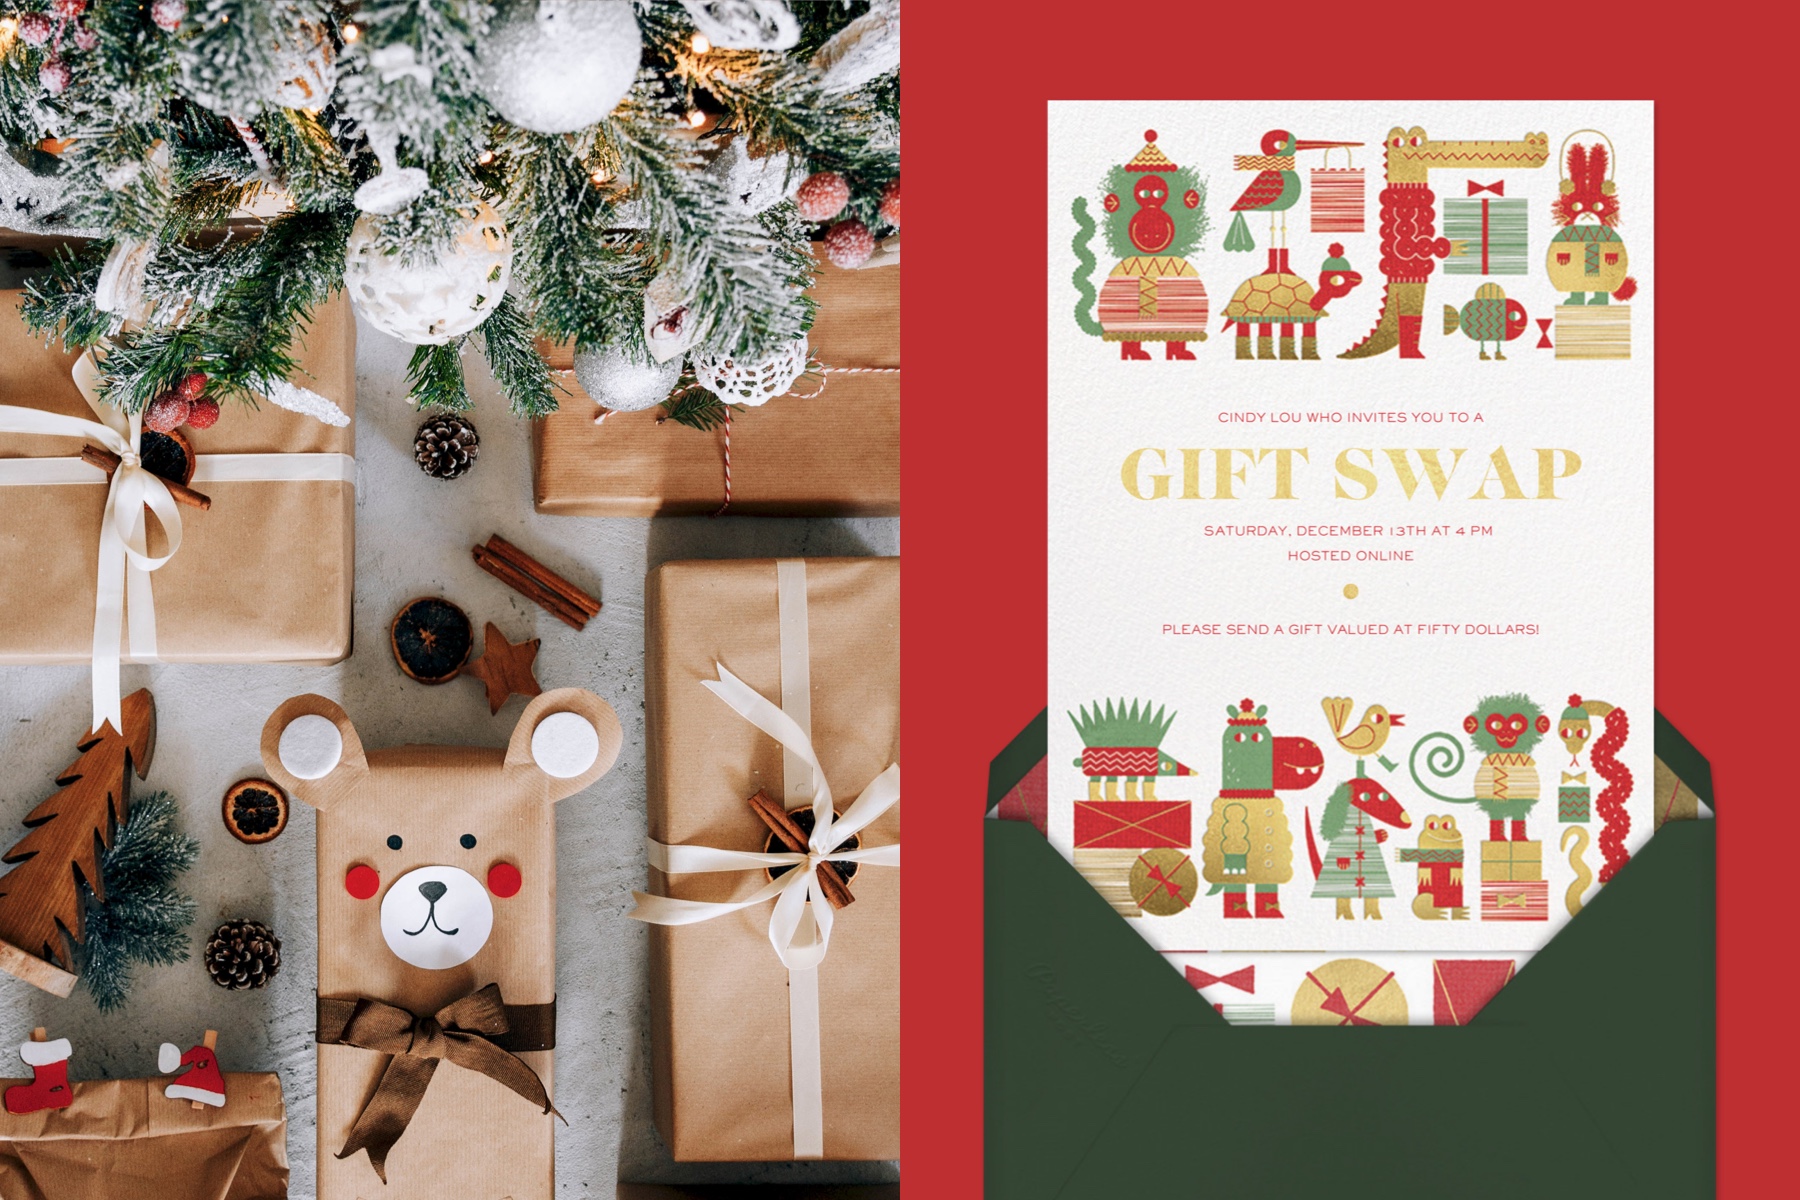 Left: Presents under a Christmas tree wrapped in brown paper. Right: A gift swap party invitation featuring animals in sweaters. 